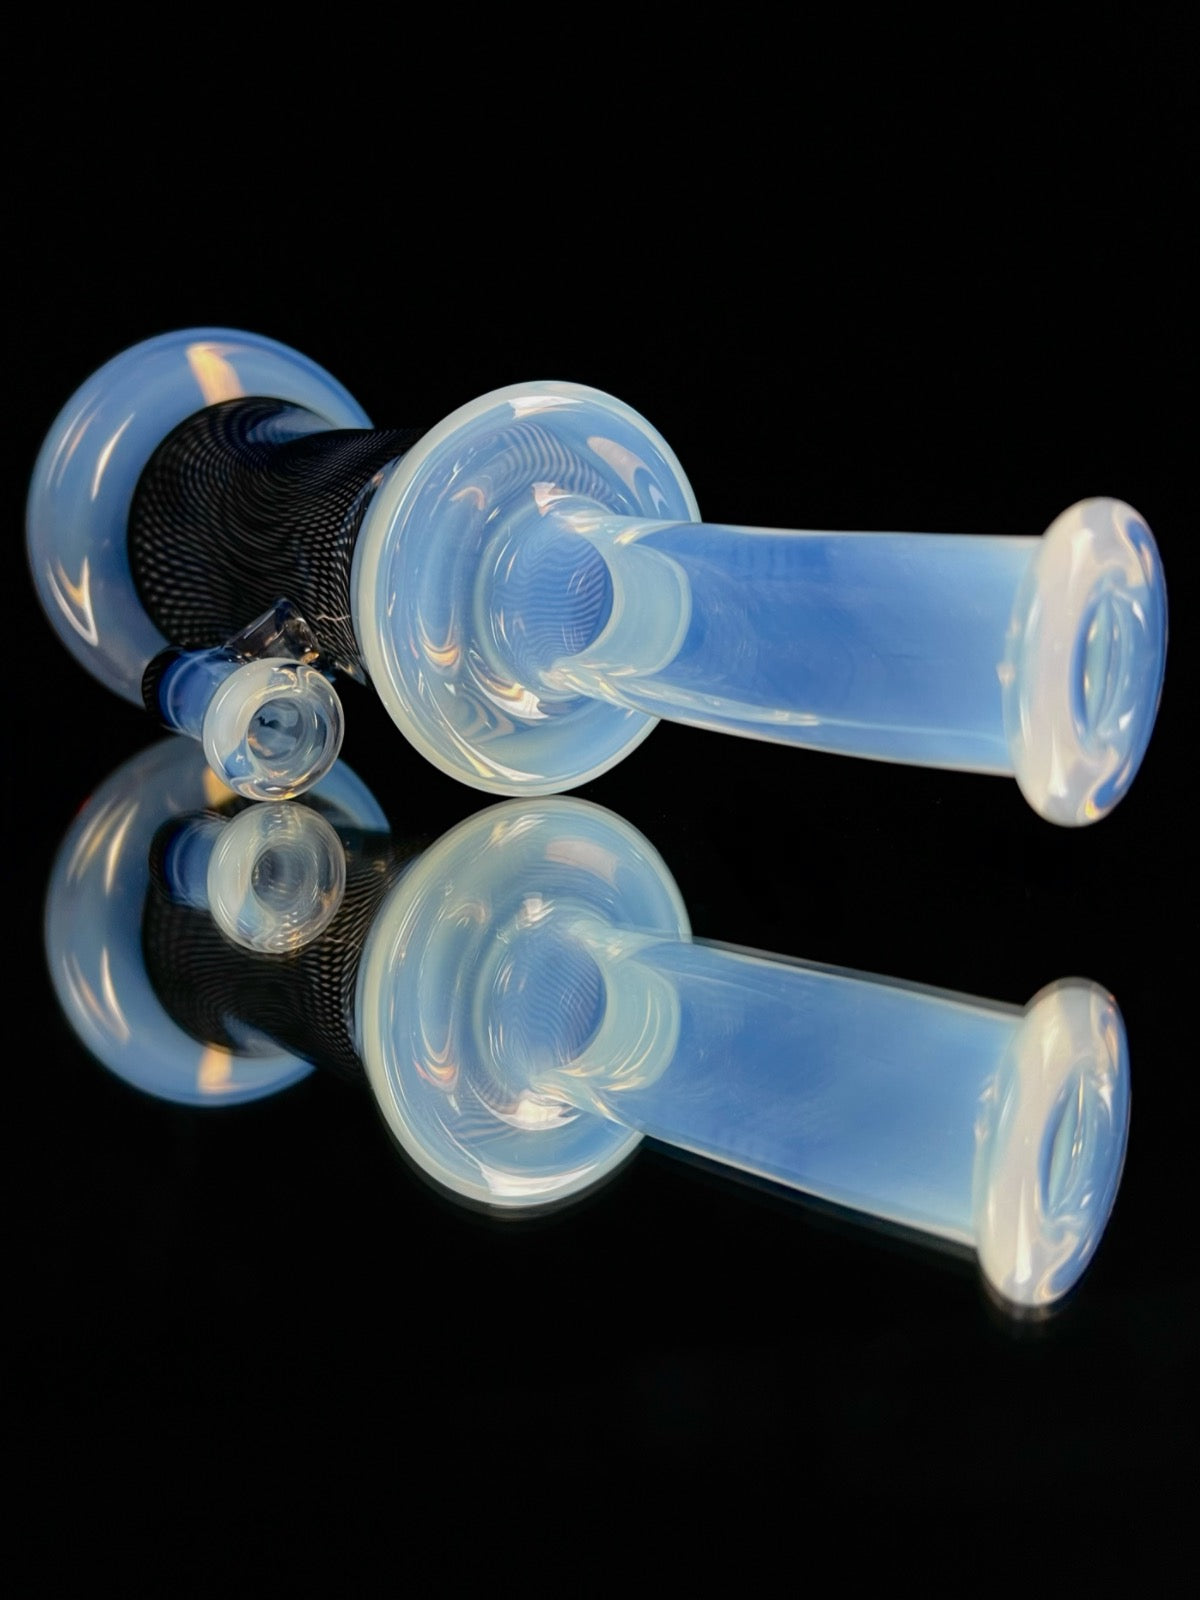 Moonstone classic hypno jawn by Jared Wetmore